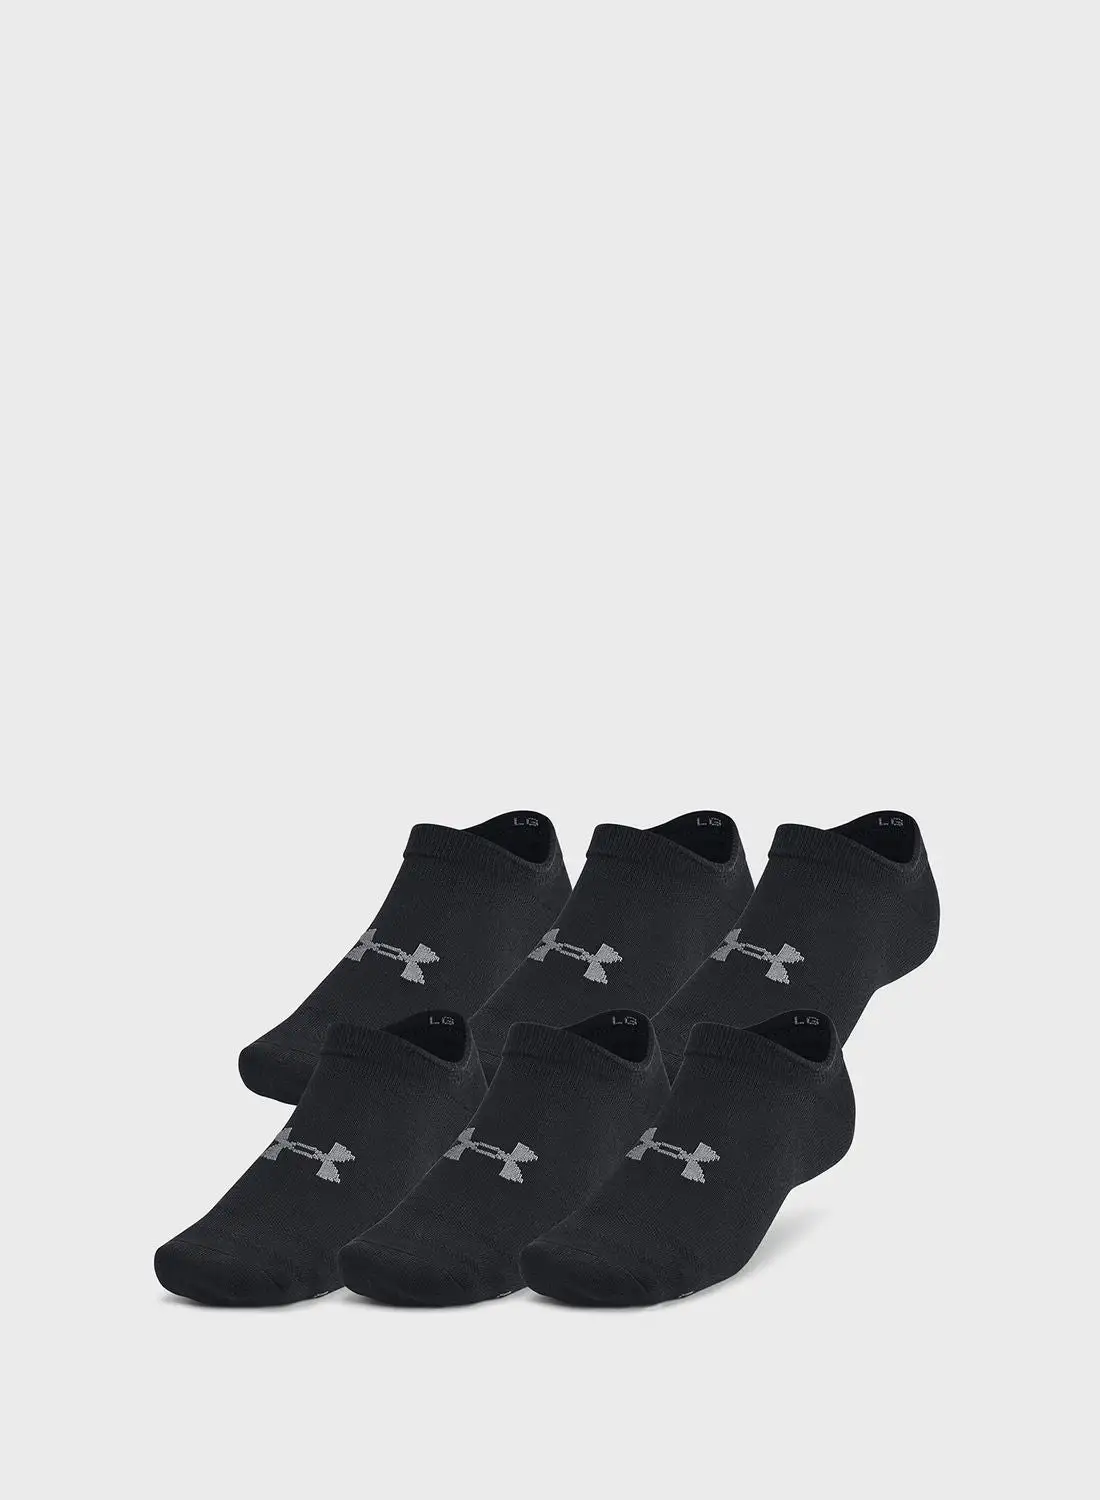 UNDER ARMOUR Essential No Show Socks (Pack Of 6)